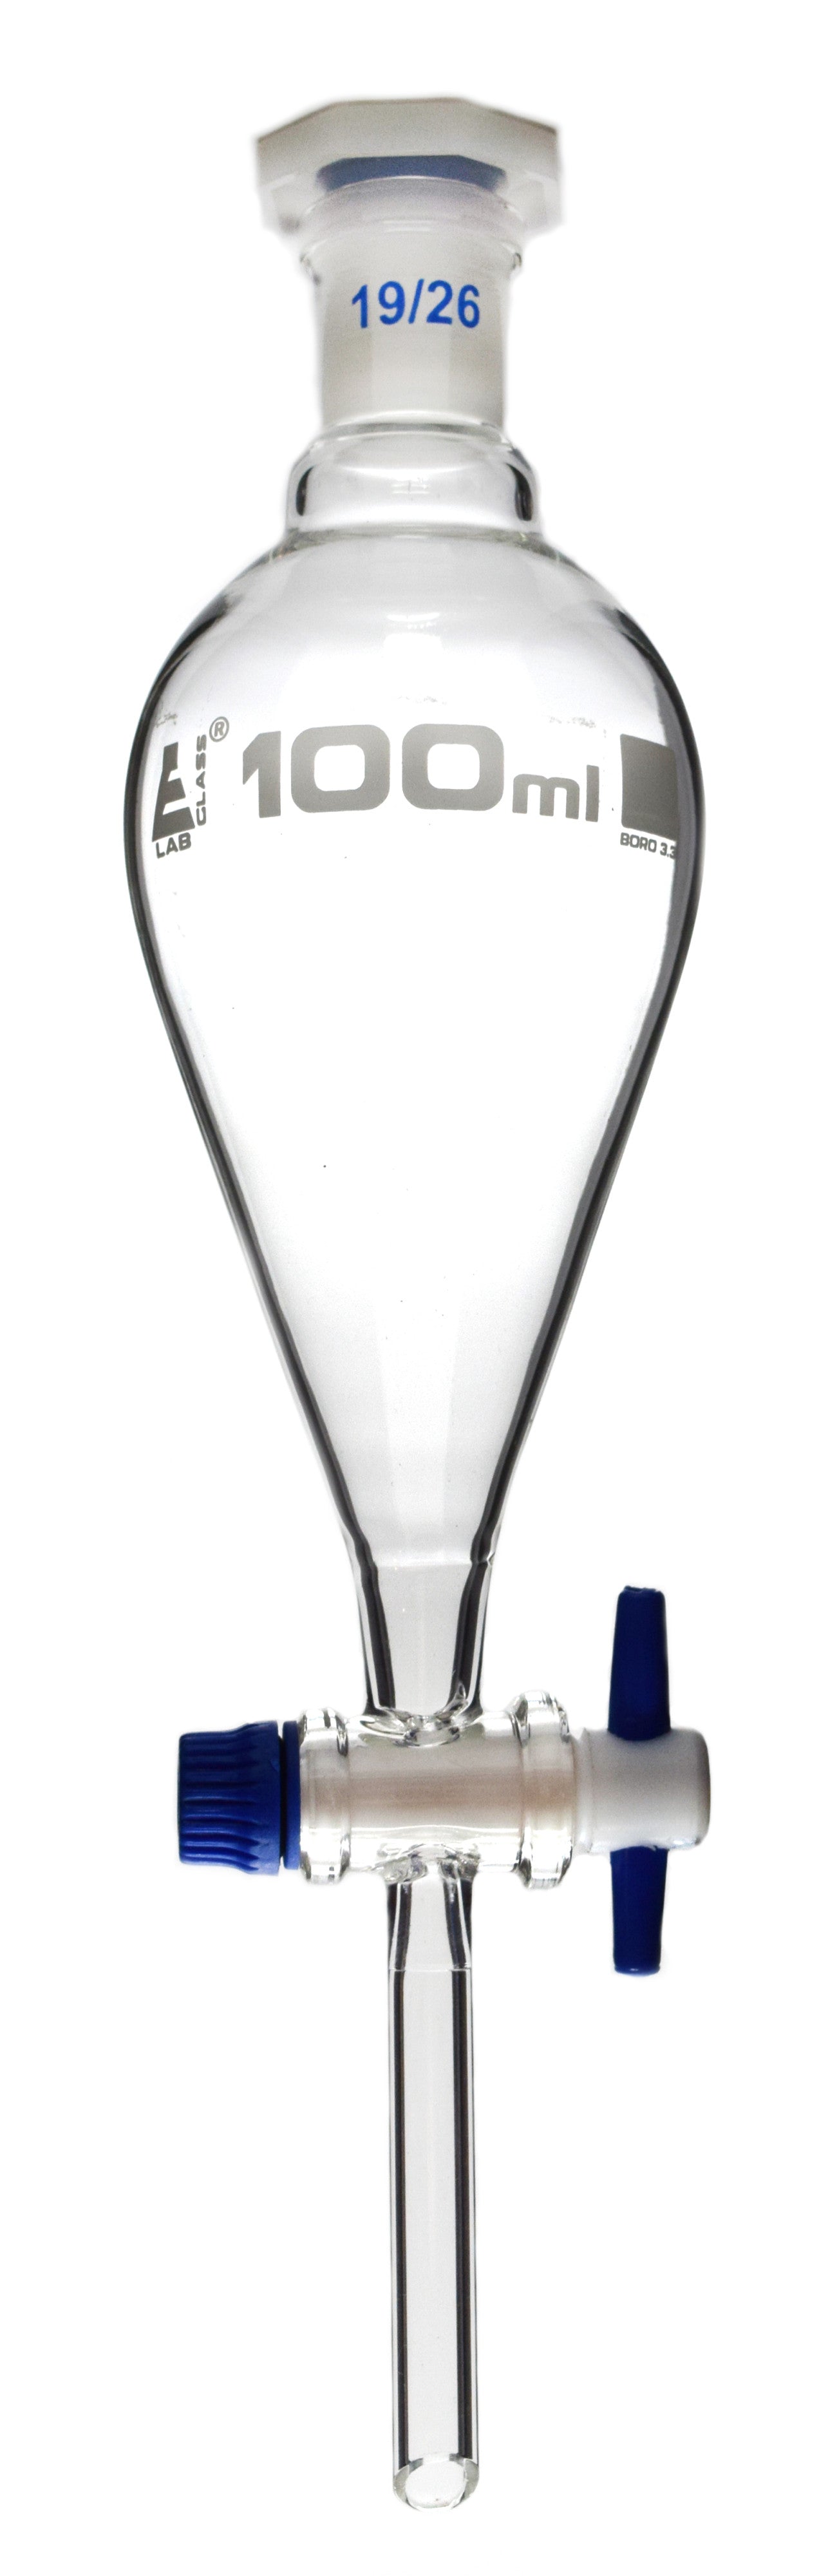 Glass Squibb Separatory Funnel with PTFE Key Stopcock and Interchangeable Polypropylene Stopper, 100 ml, Autoclavable